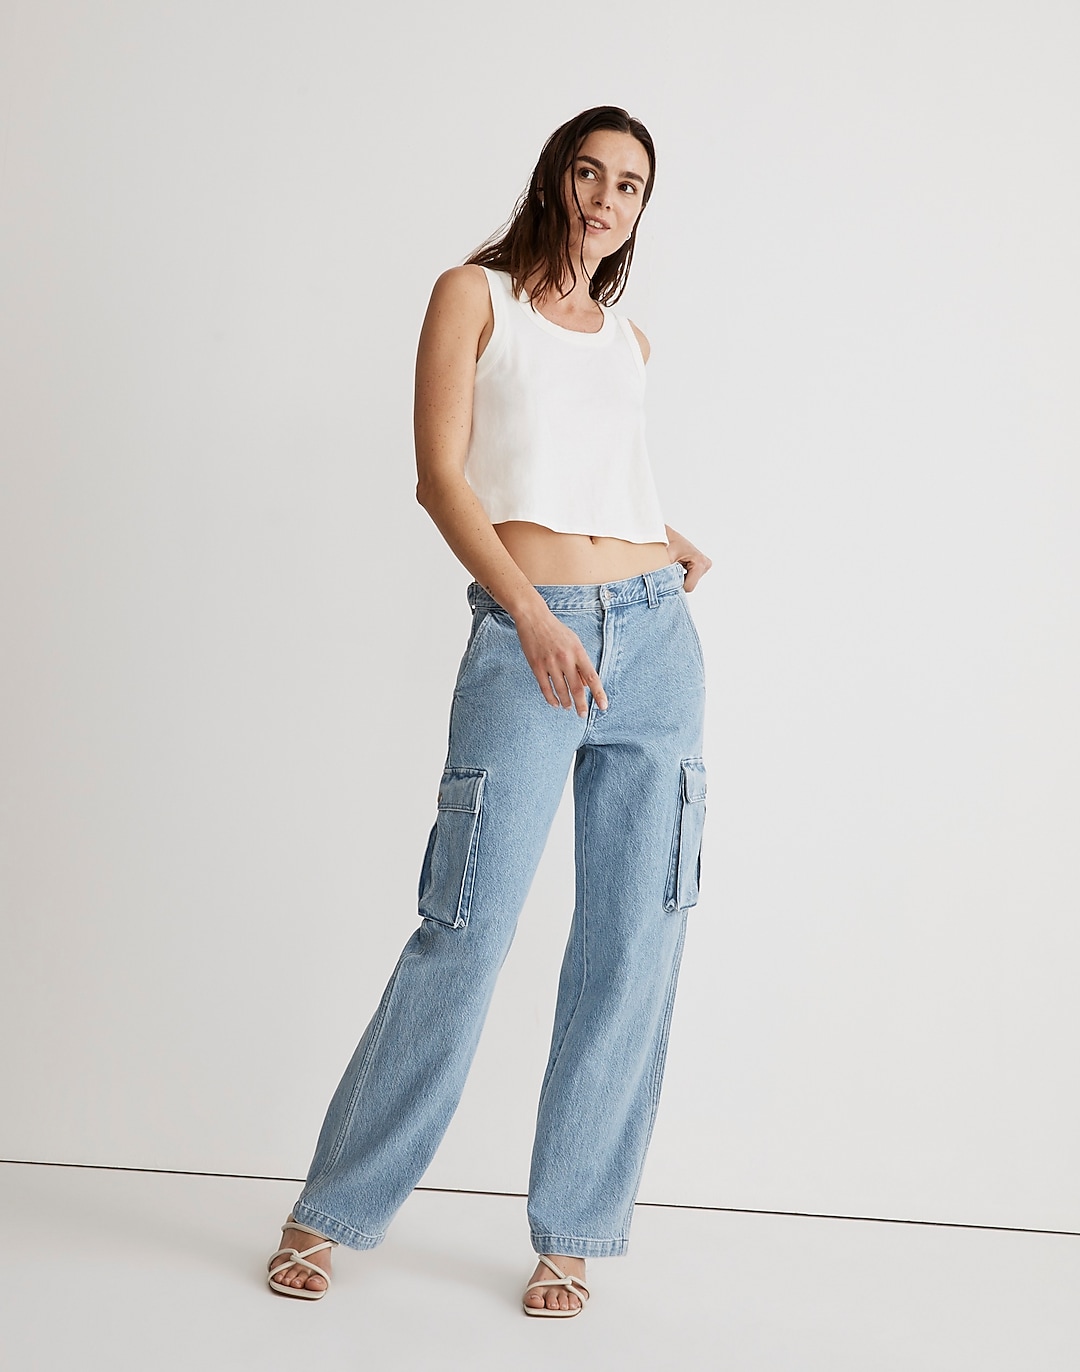 Low-Slung Straight Cargo Jeans in Coleman Wash | Madewell